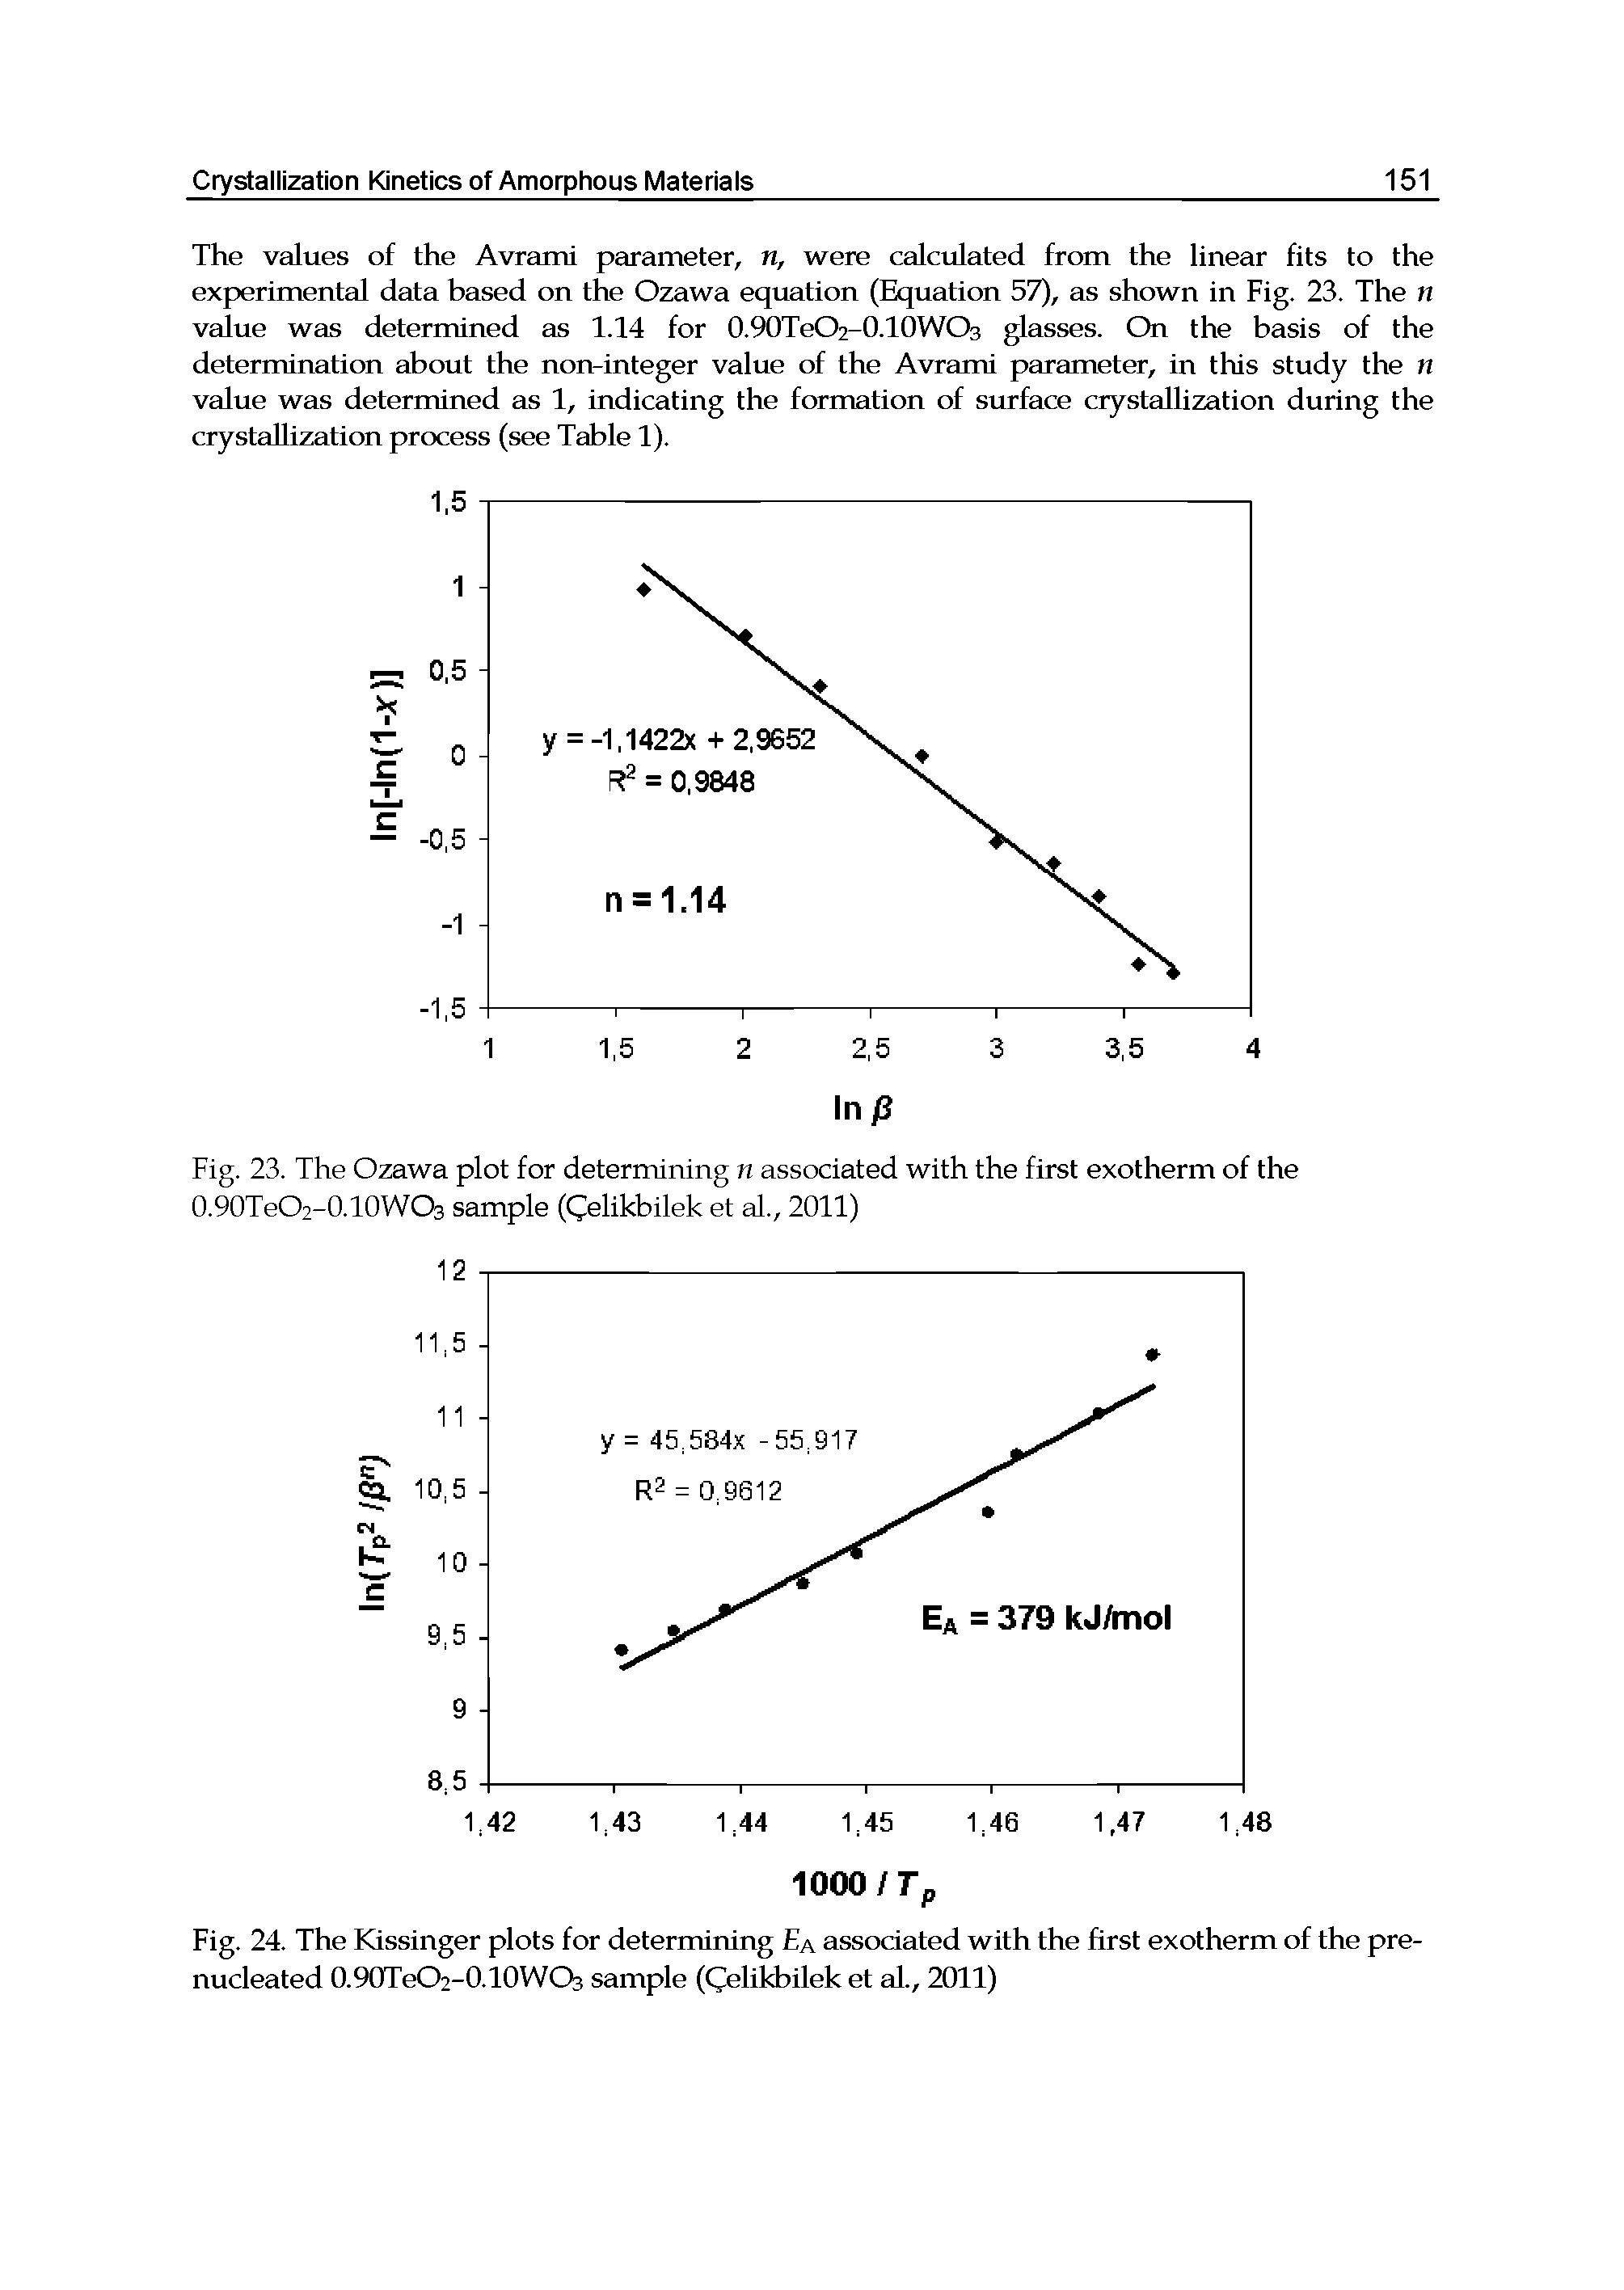 Fig. 24. The Kissinger plots for determining Ea associated with the first exotherm of the prenucleated 0.90Te02-0.10W03 sample (Oehkbilek et aL, 2011)...